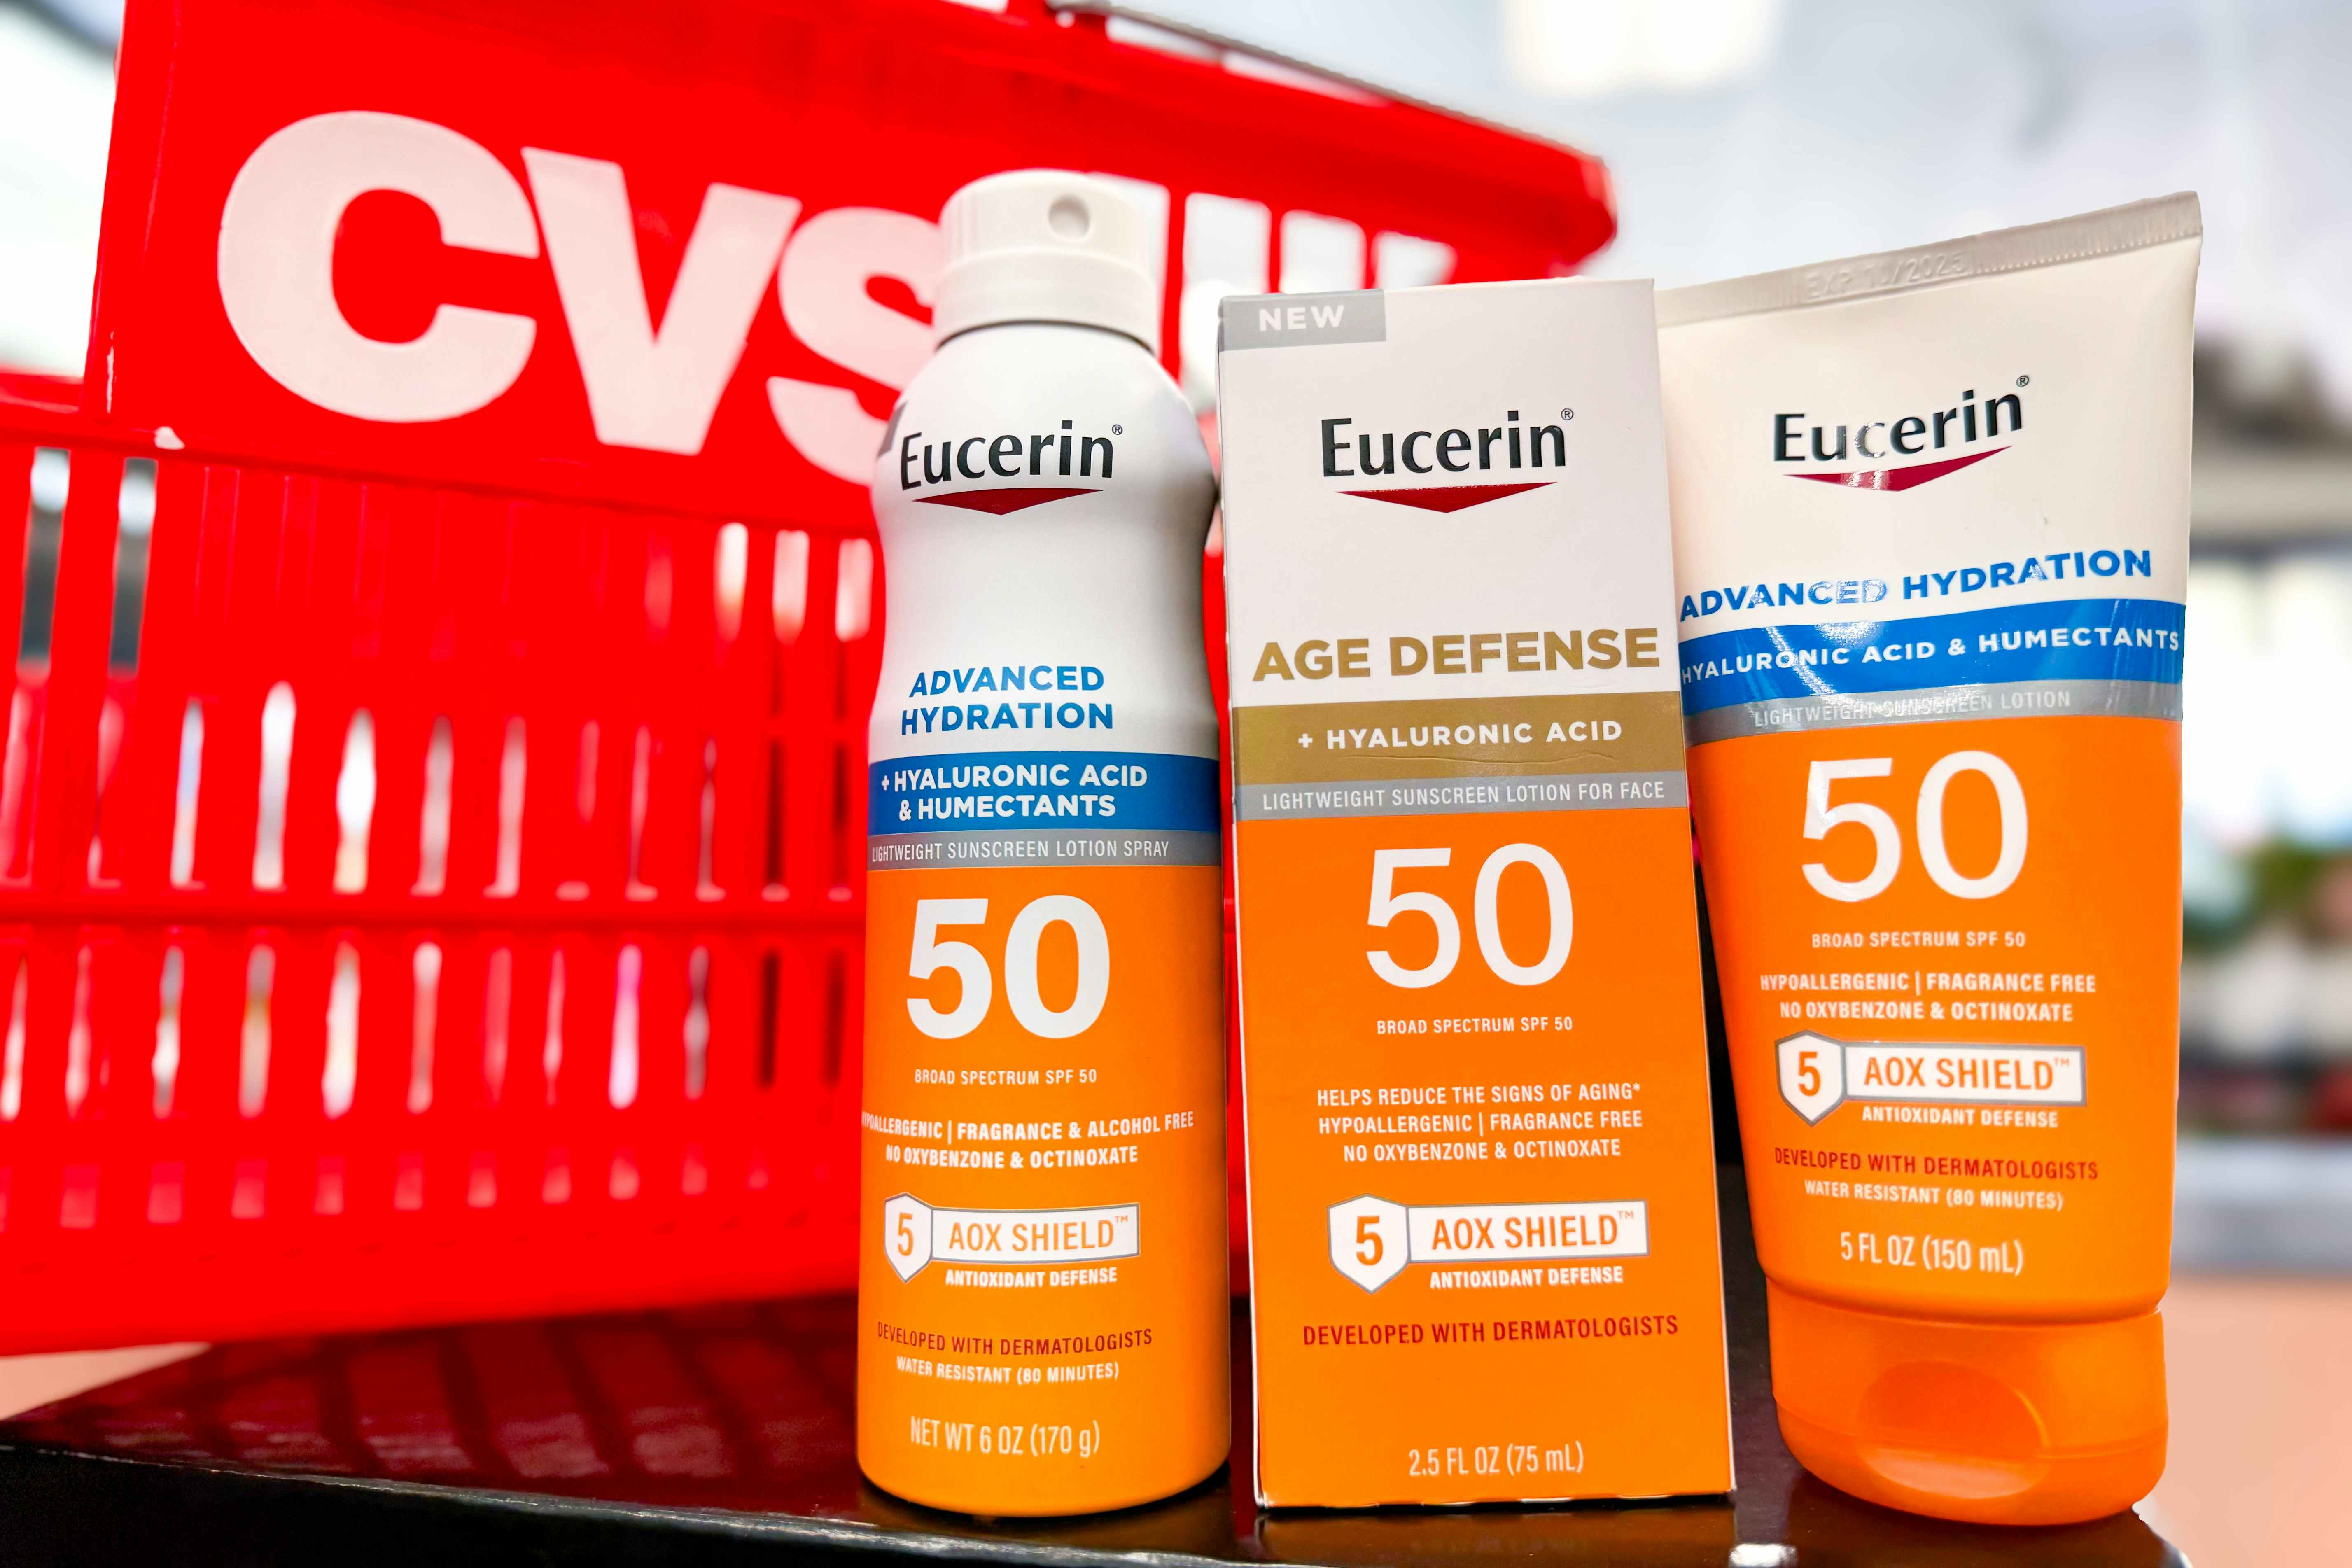 Get $7 Off Eucerin Sunscreen During This CVS Sale